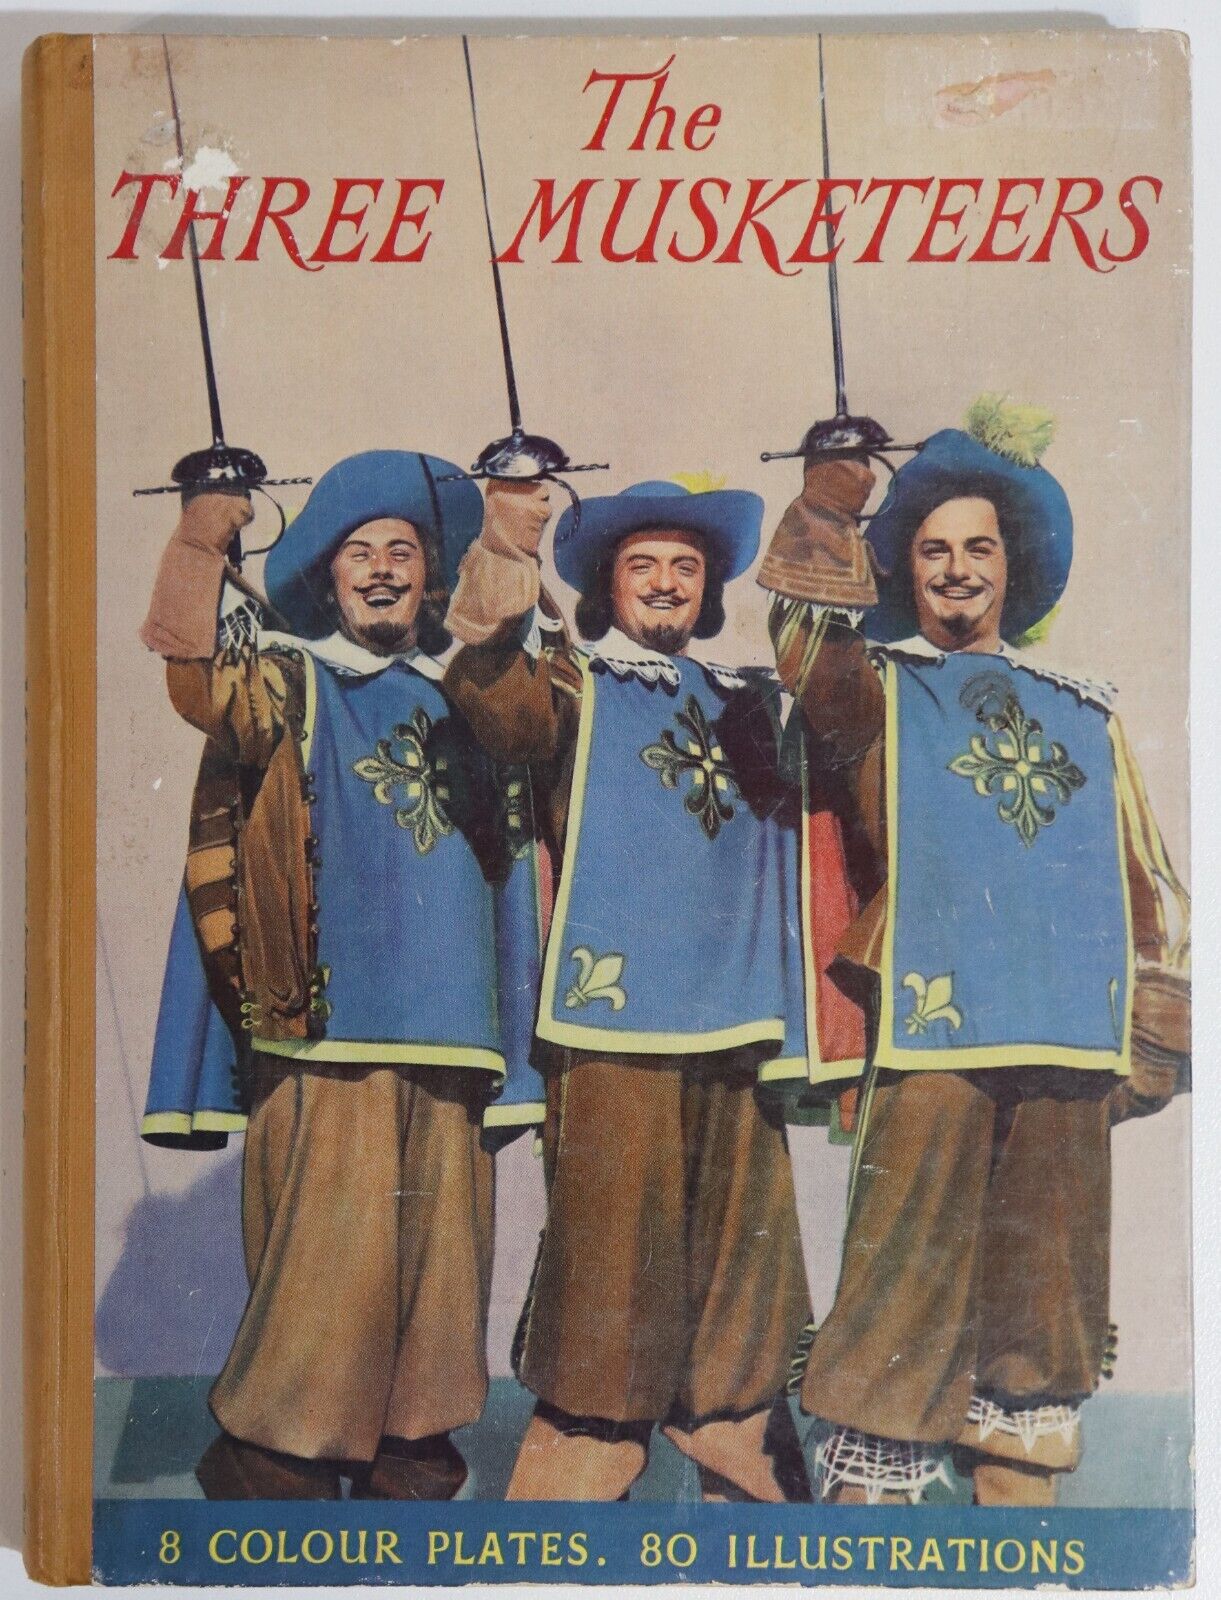 The Three Musketeers by Alexandre Dumas - c1955 - Vintage Children's Book